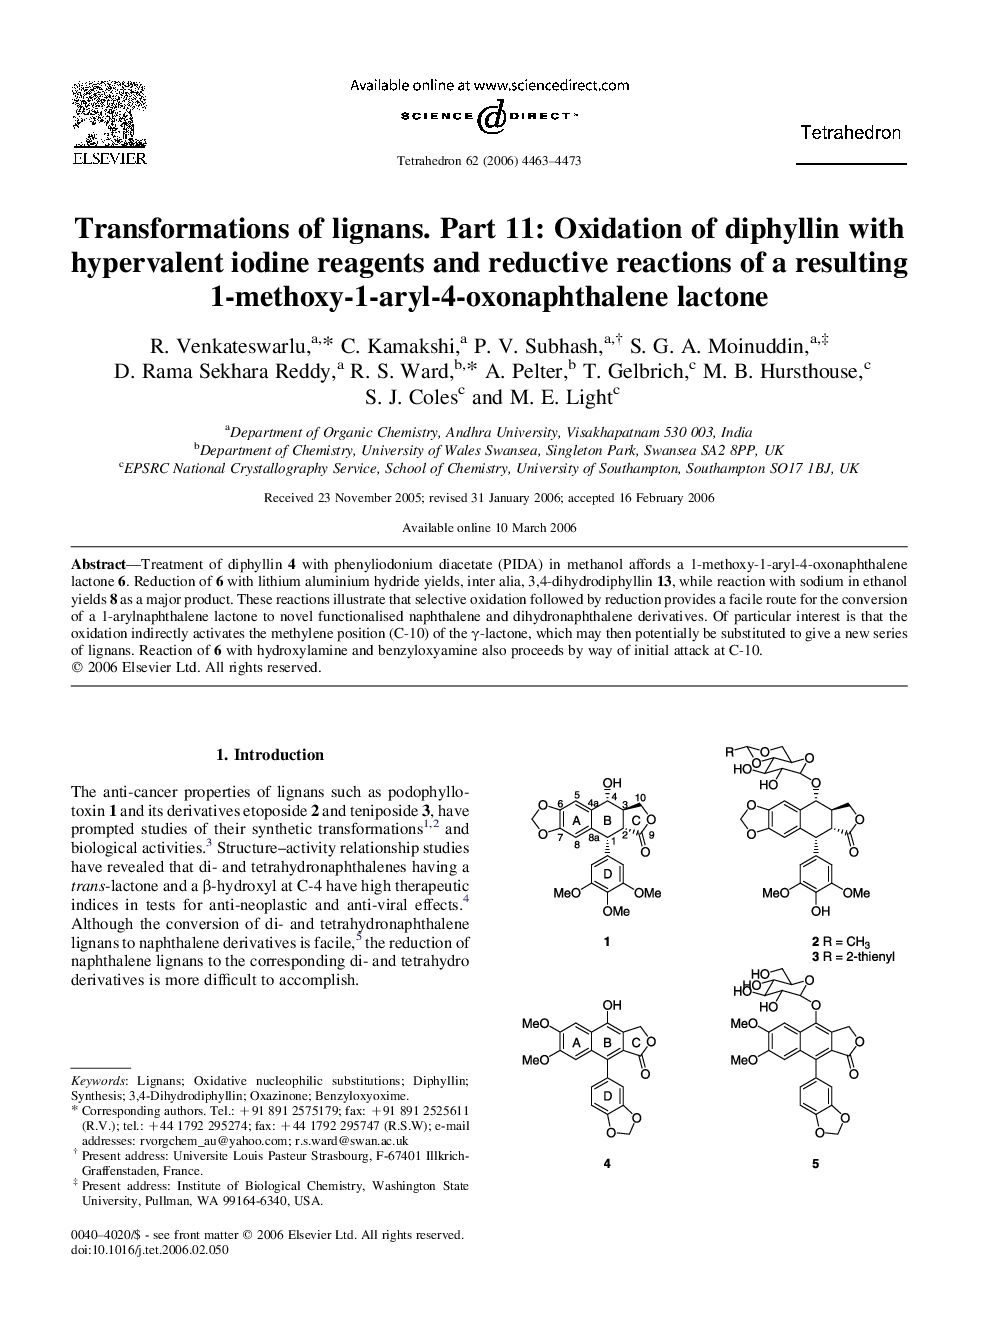 Transformations of lignans. Part 11: Oxidation of diphyllin with hypervalent iodine reagents and reductive reactions of a resulting 1-methoxy-1-aryl-4-oxonaphthalene lactone